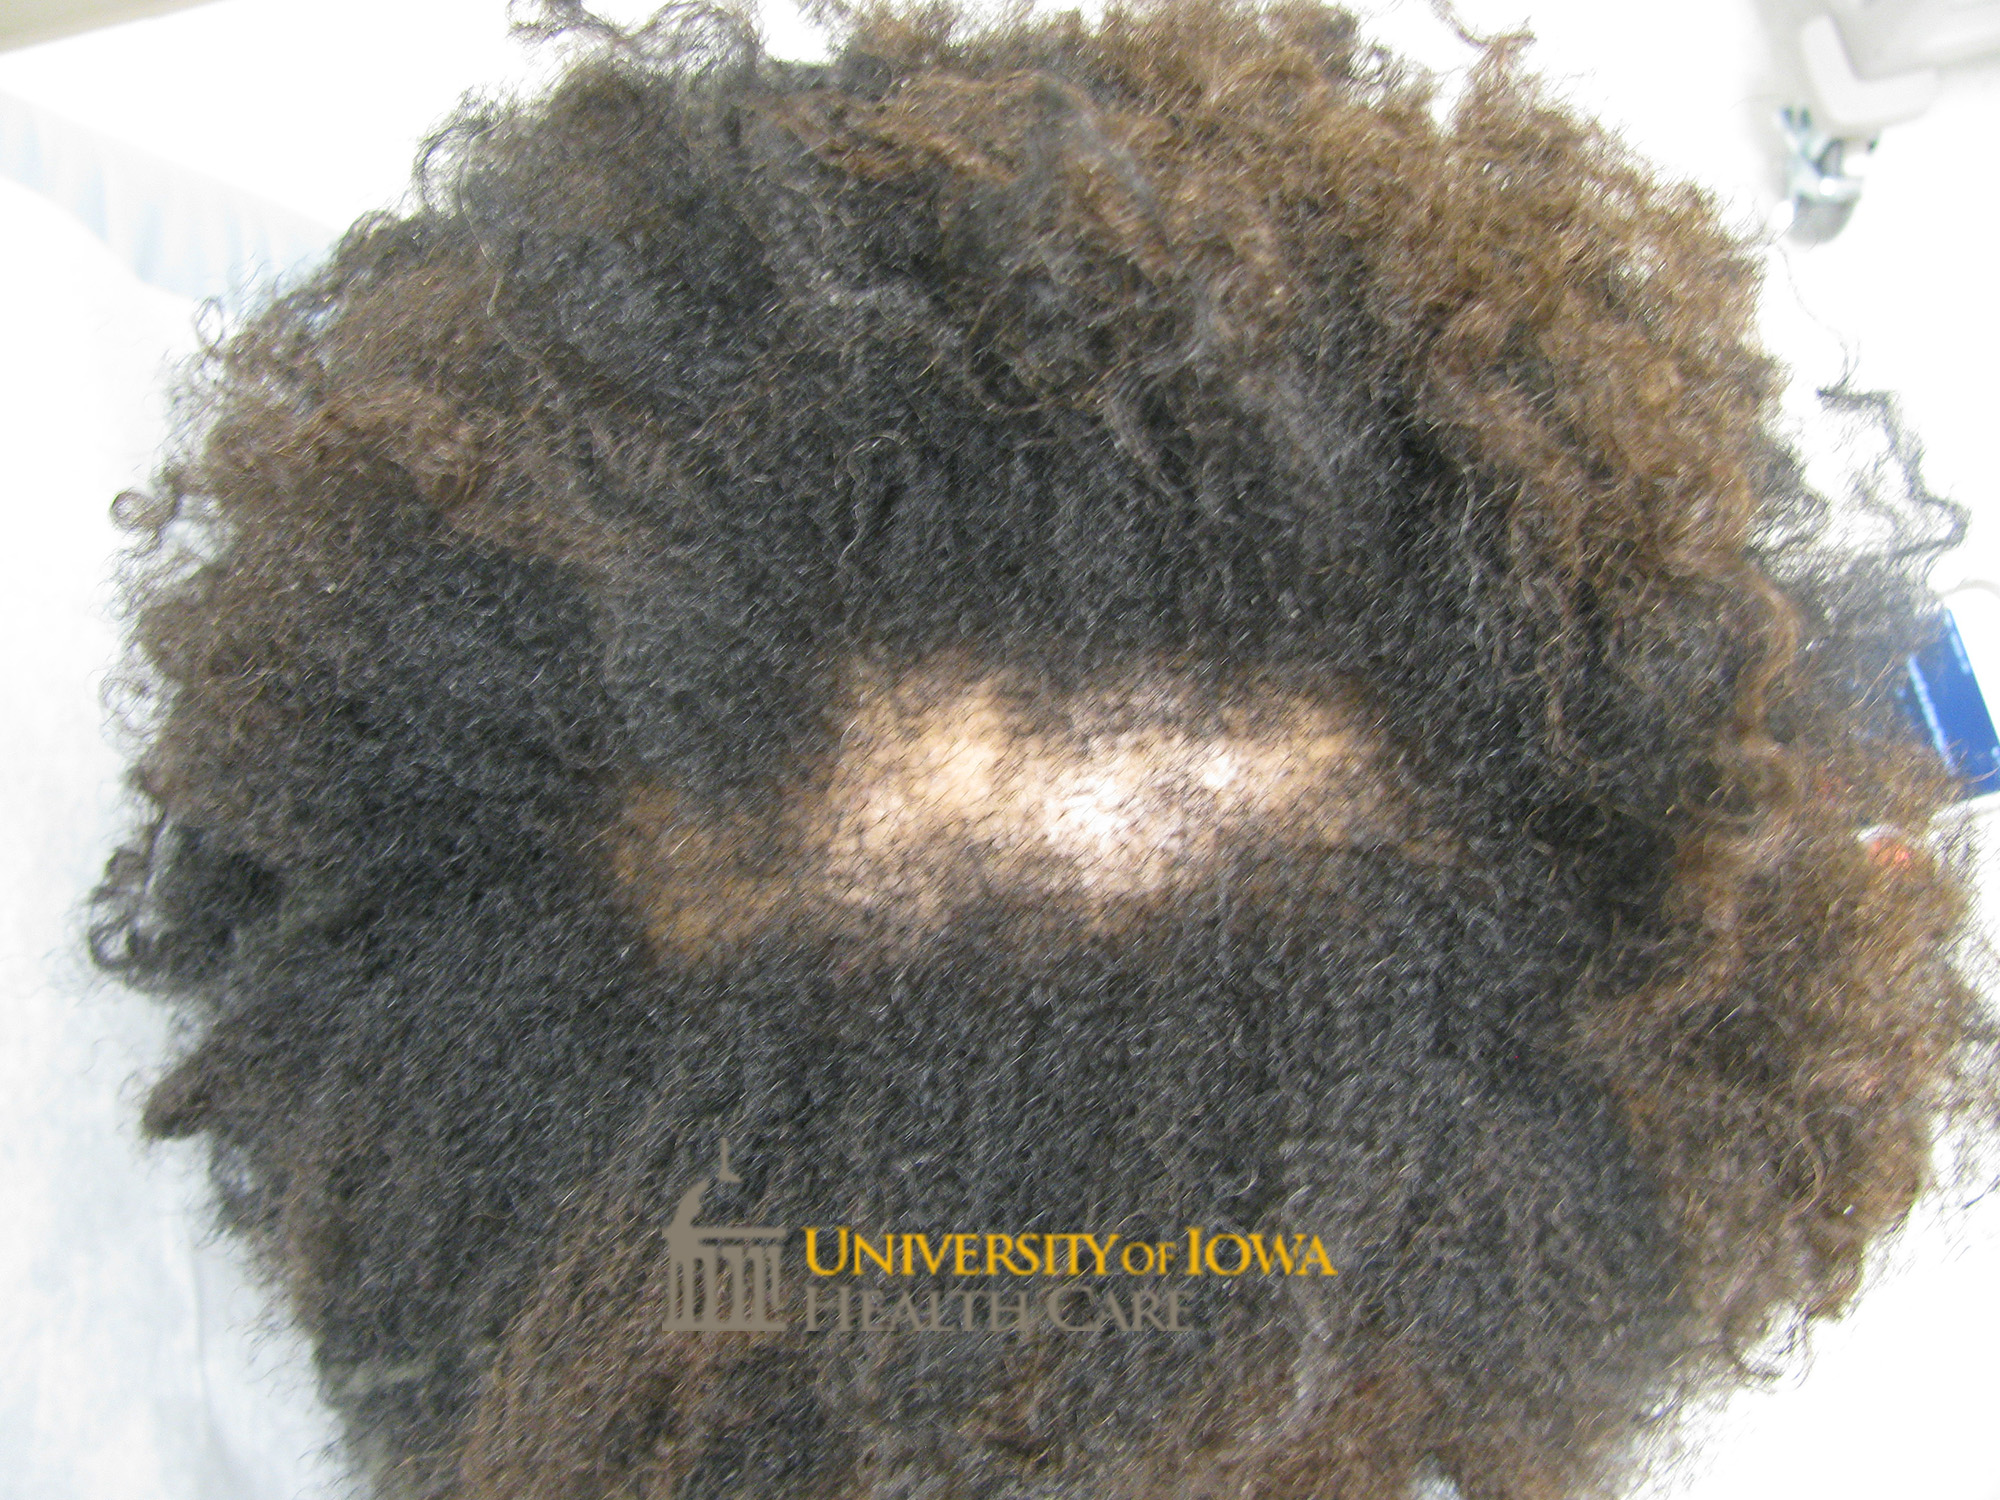 Patch of scarring alopecia with irregular borders on the scalp. (click images for higher resolution).